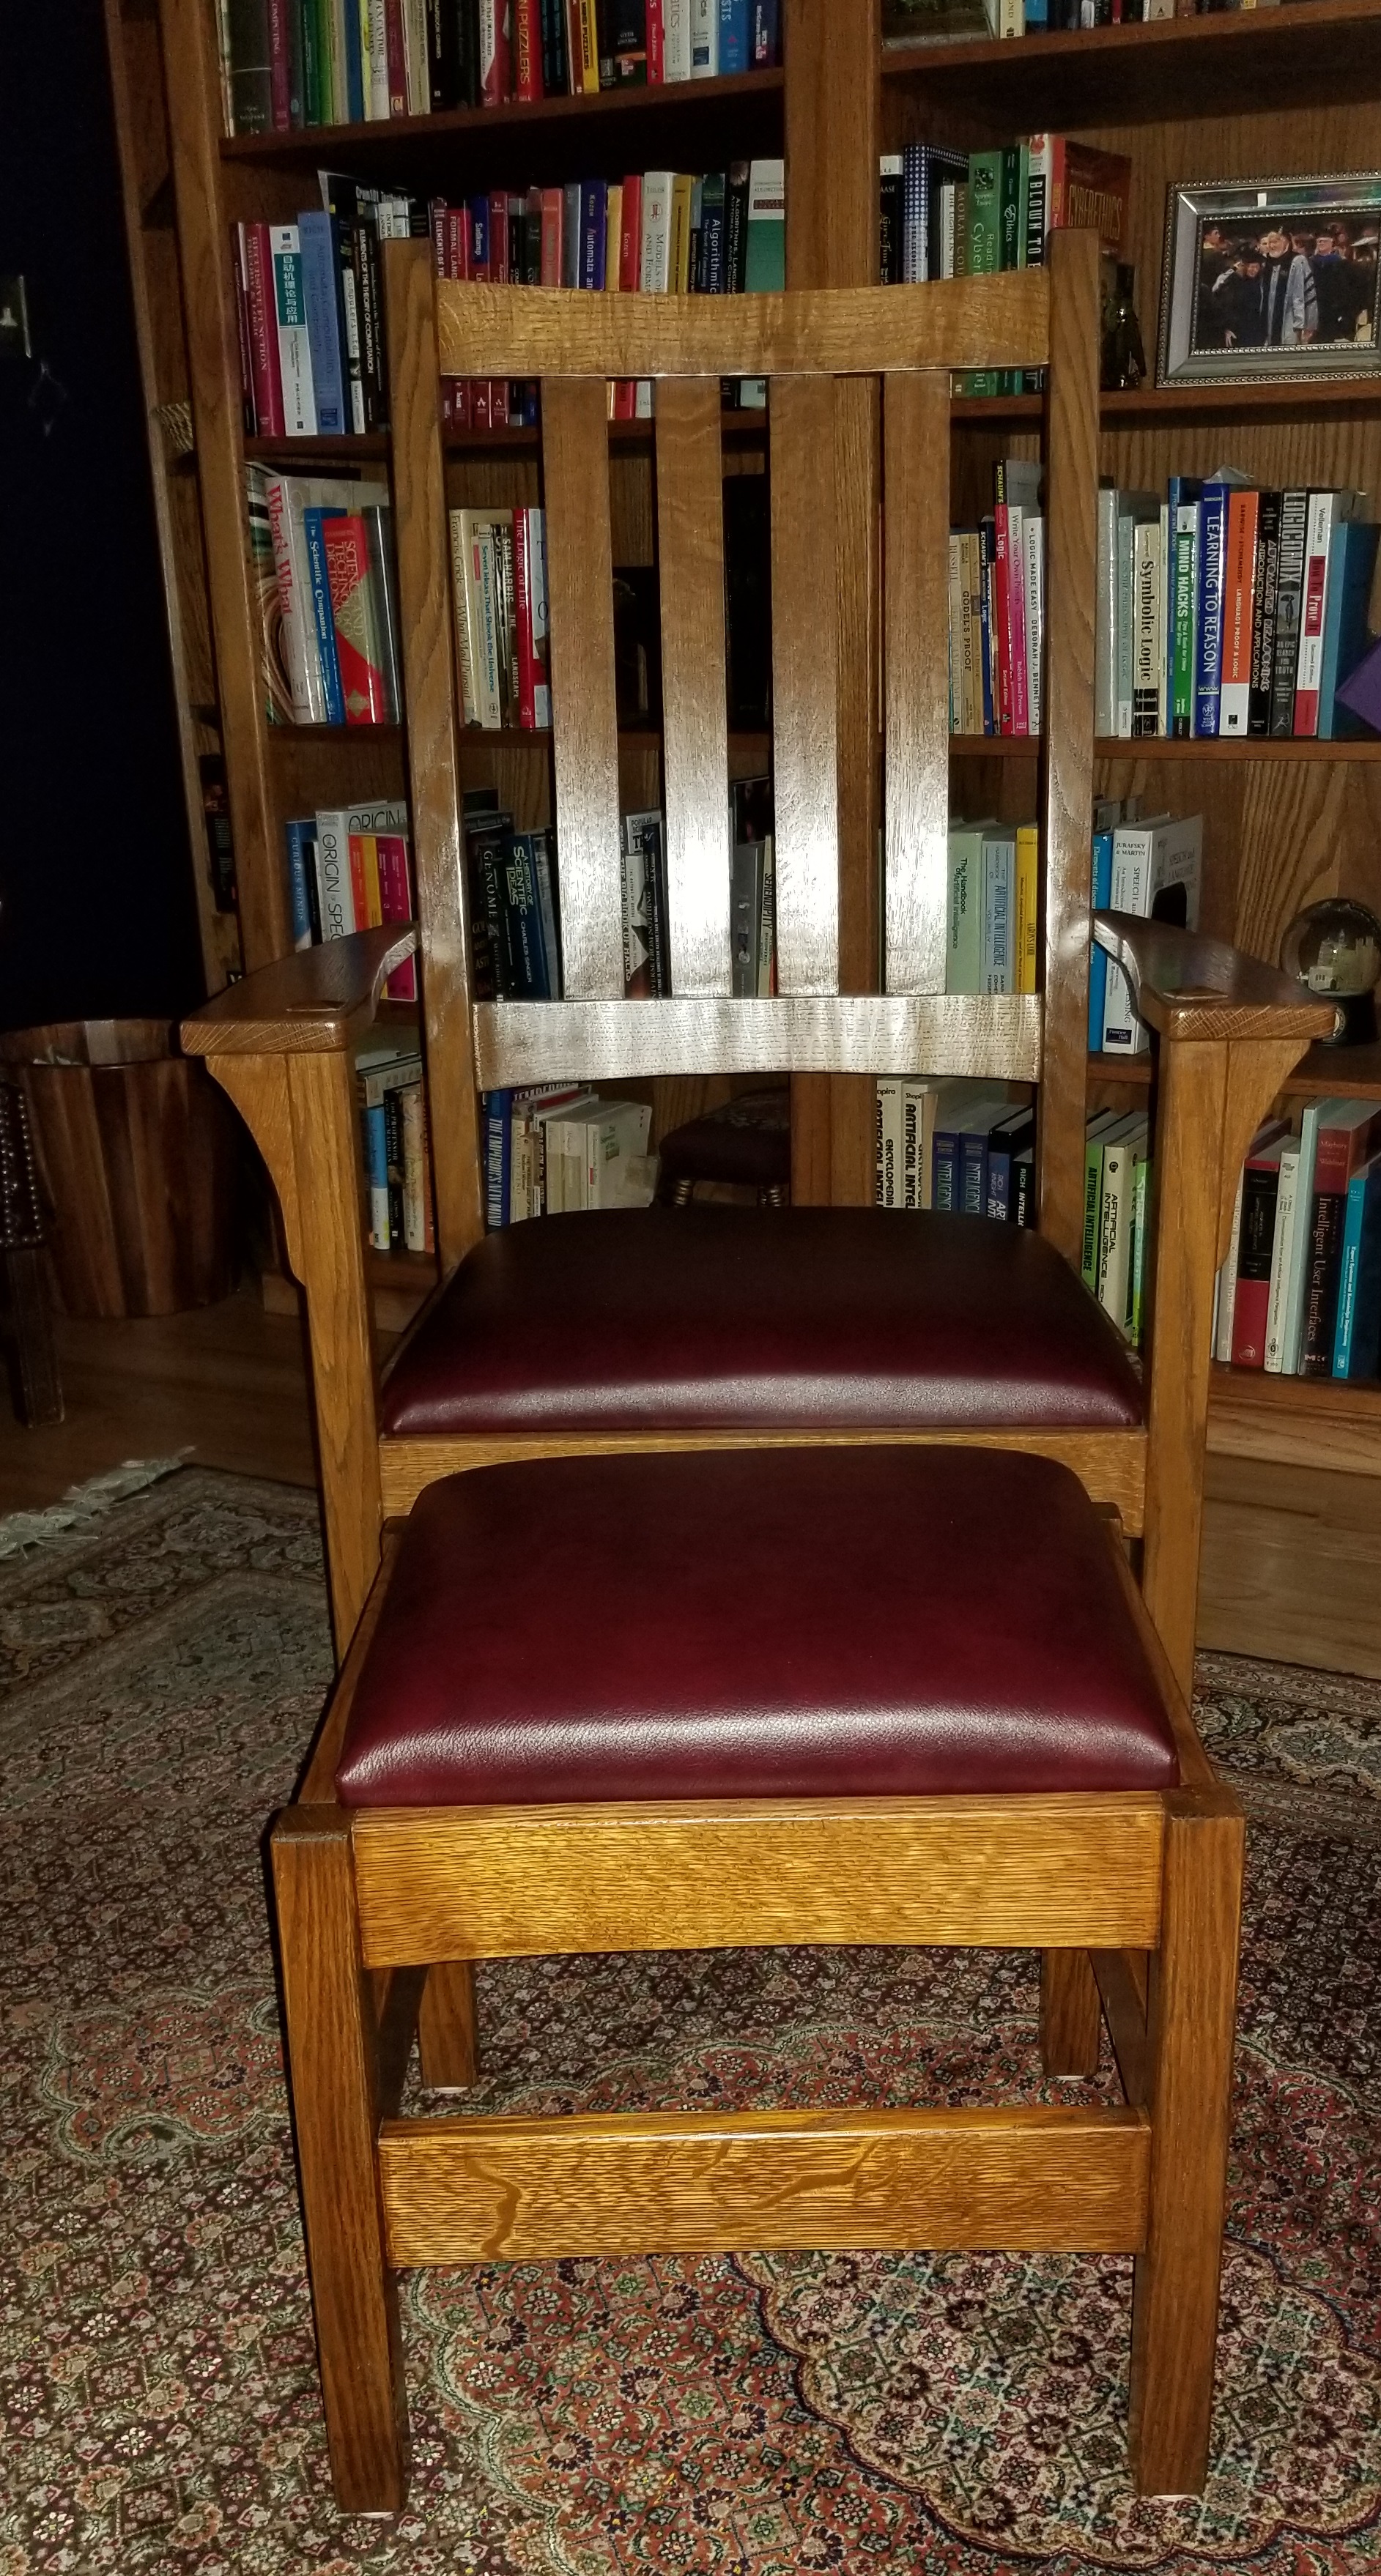 arm chair and ottoman